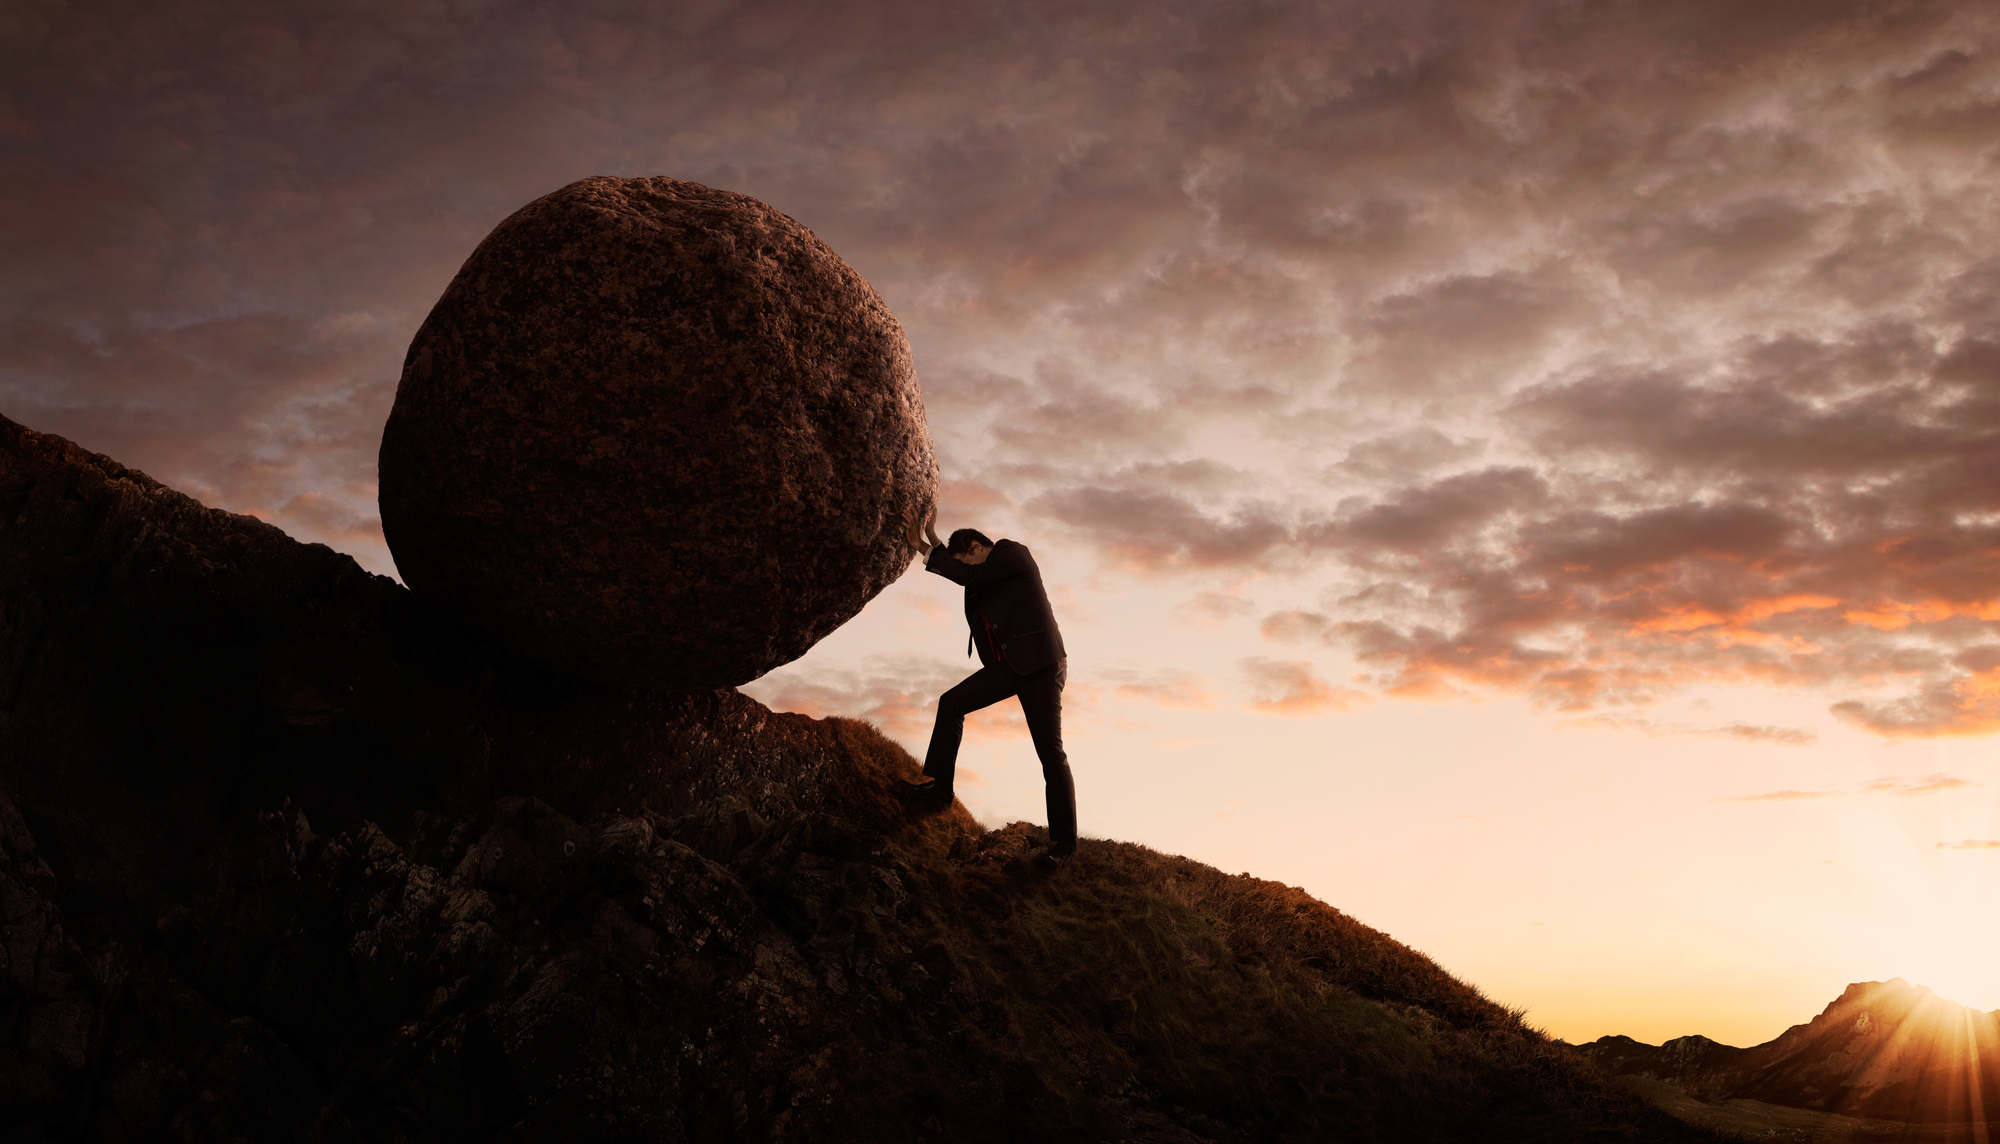 The lessons of Sisyphus